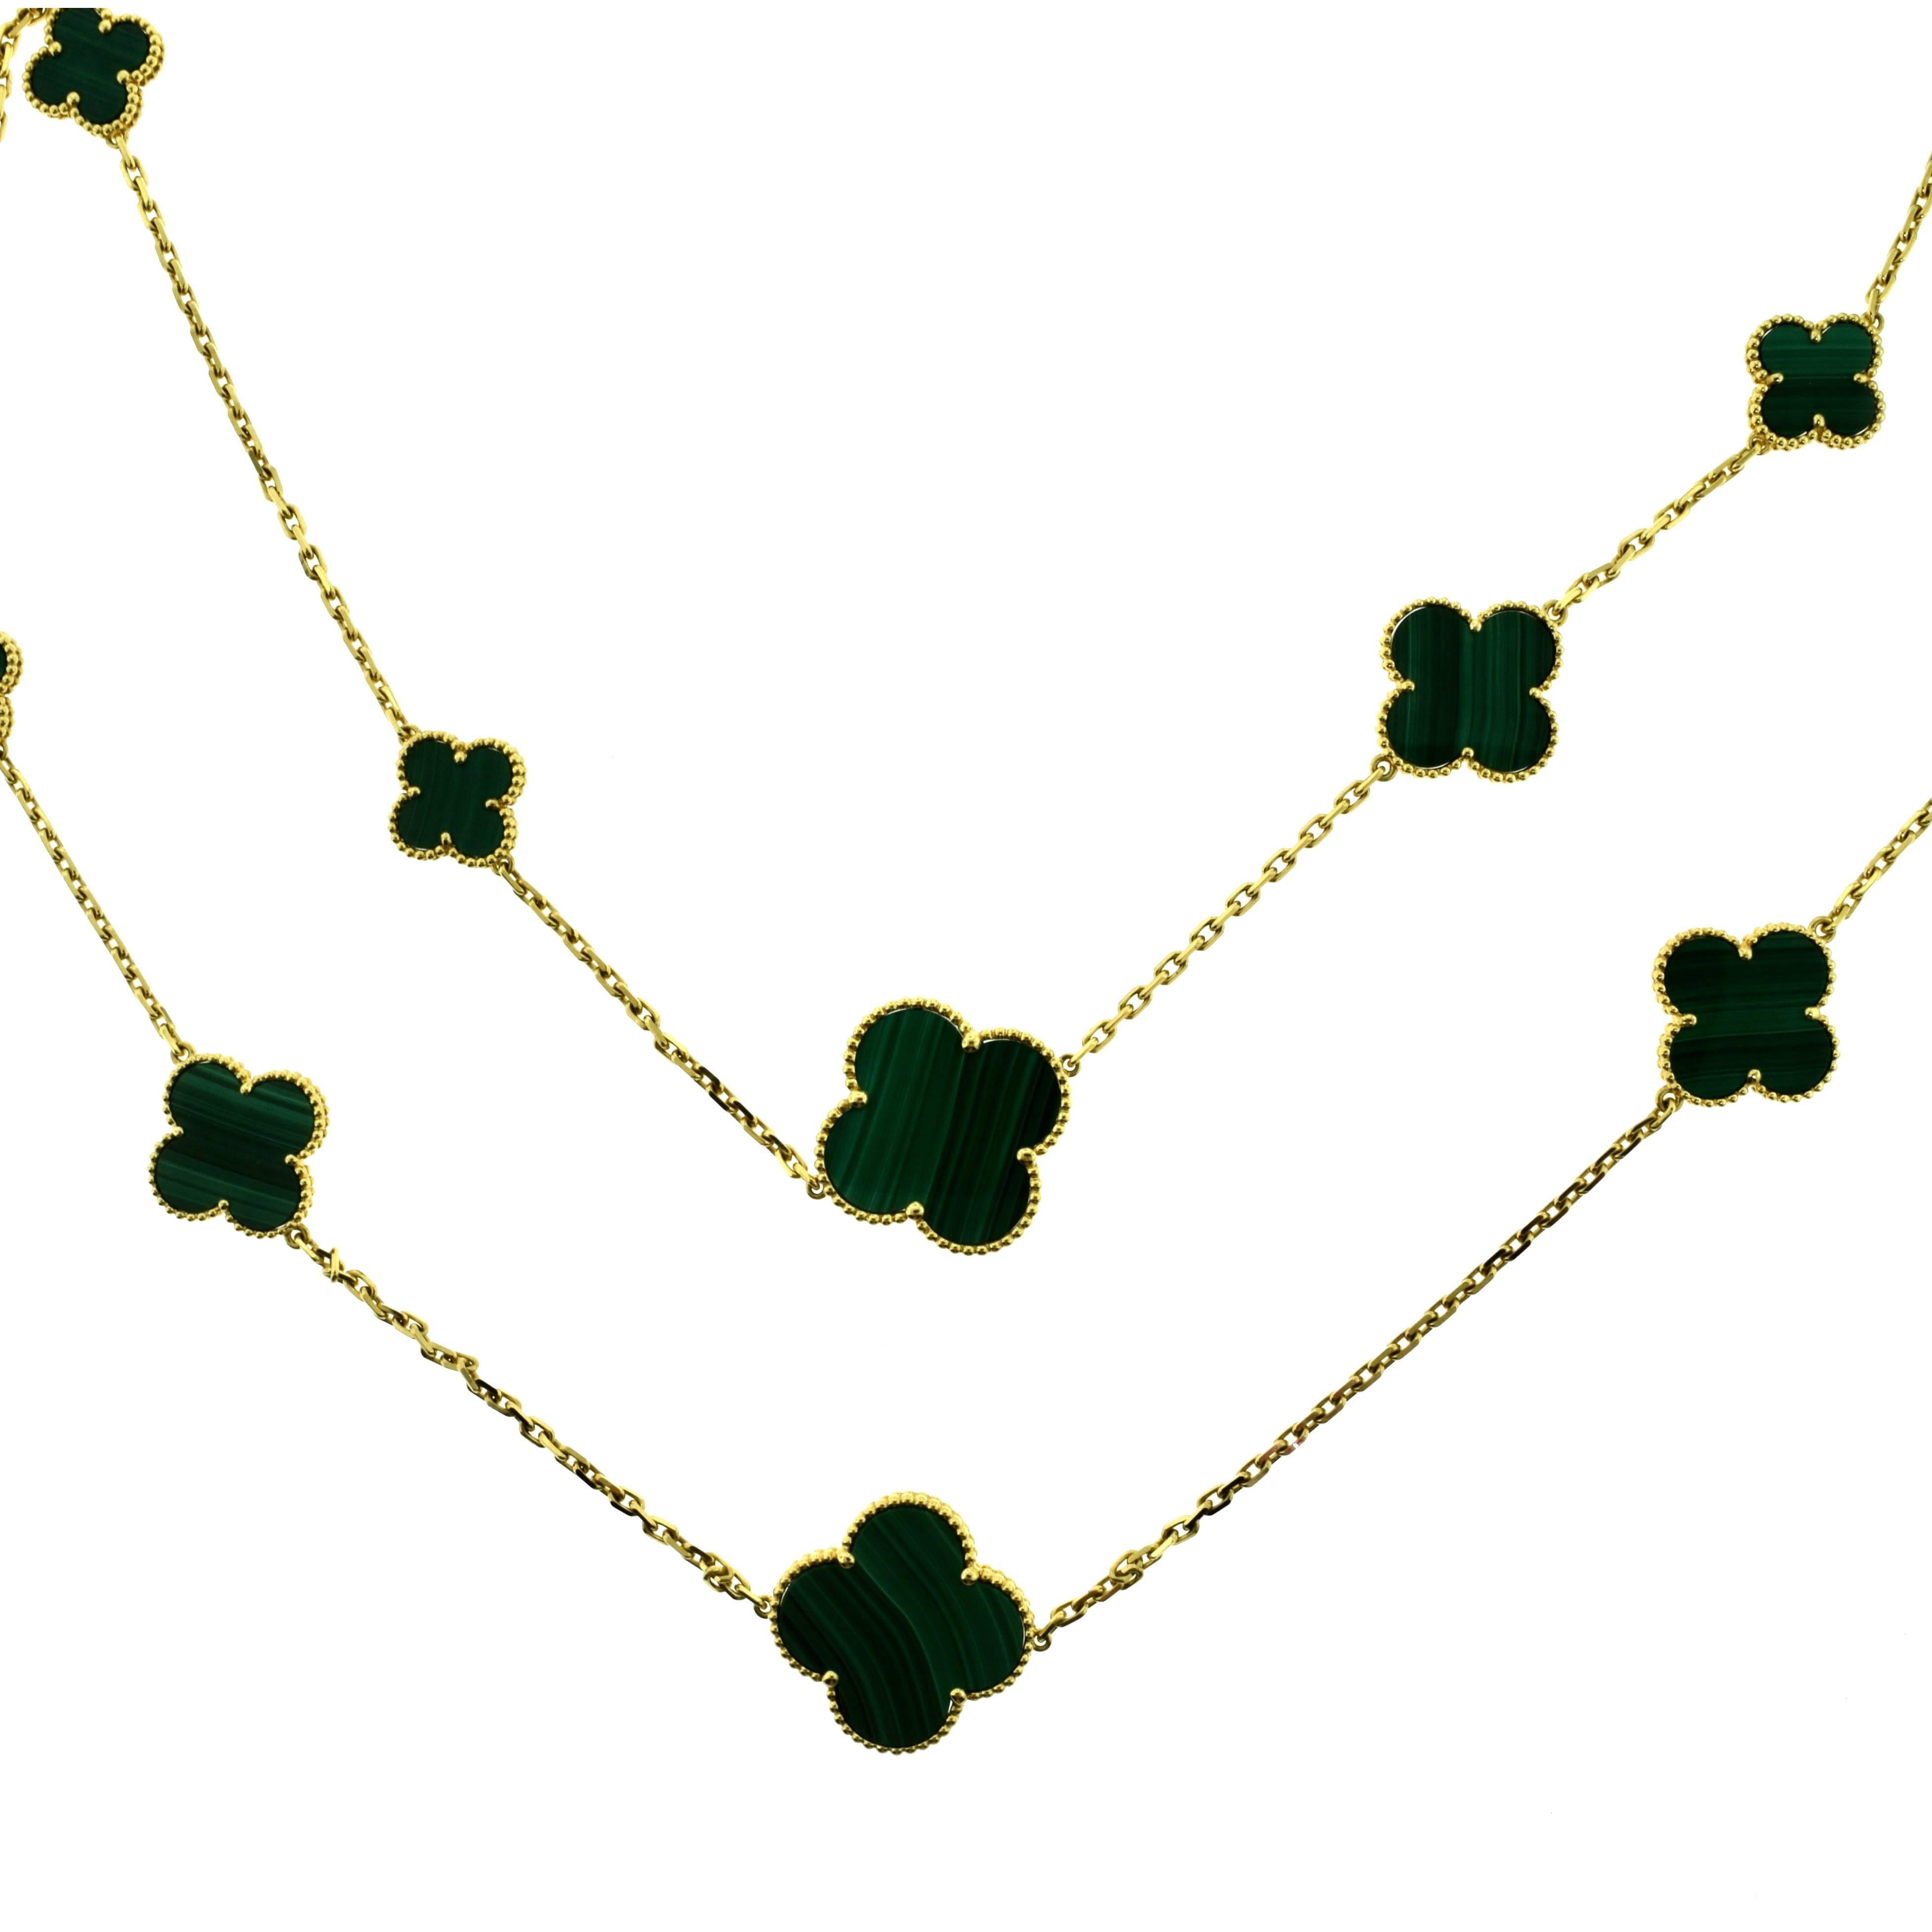 Van Cleef & Arpels Magic Alhambra Malachite 16 Motif Long Necklace In Excellent Condition For Sale In Miami, FL